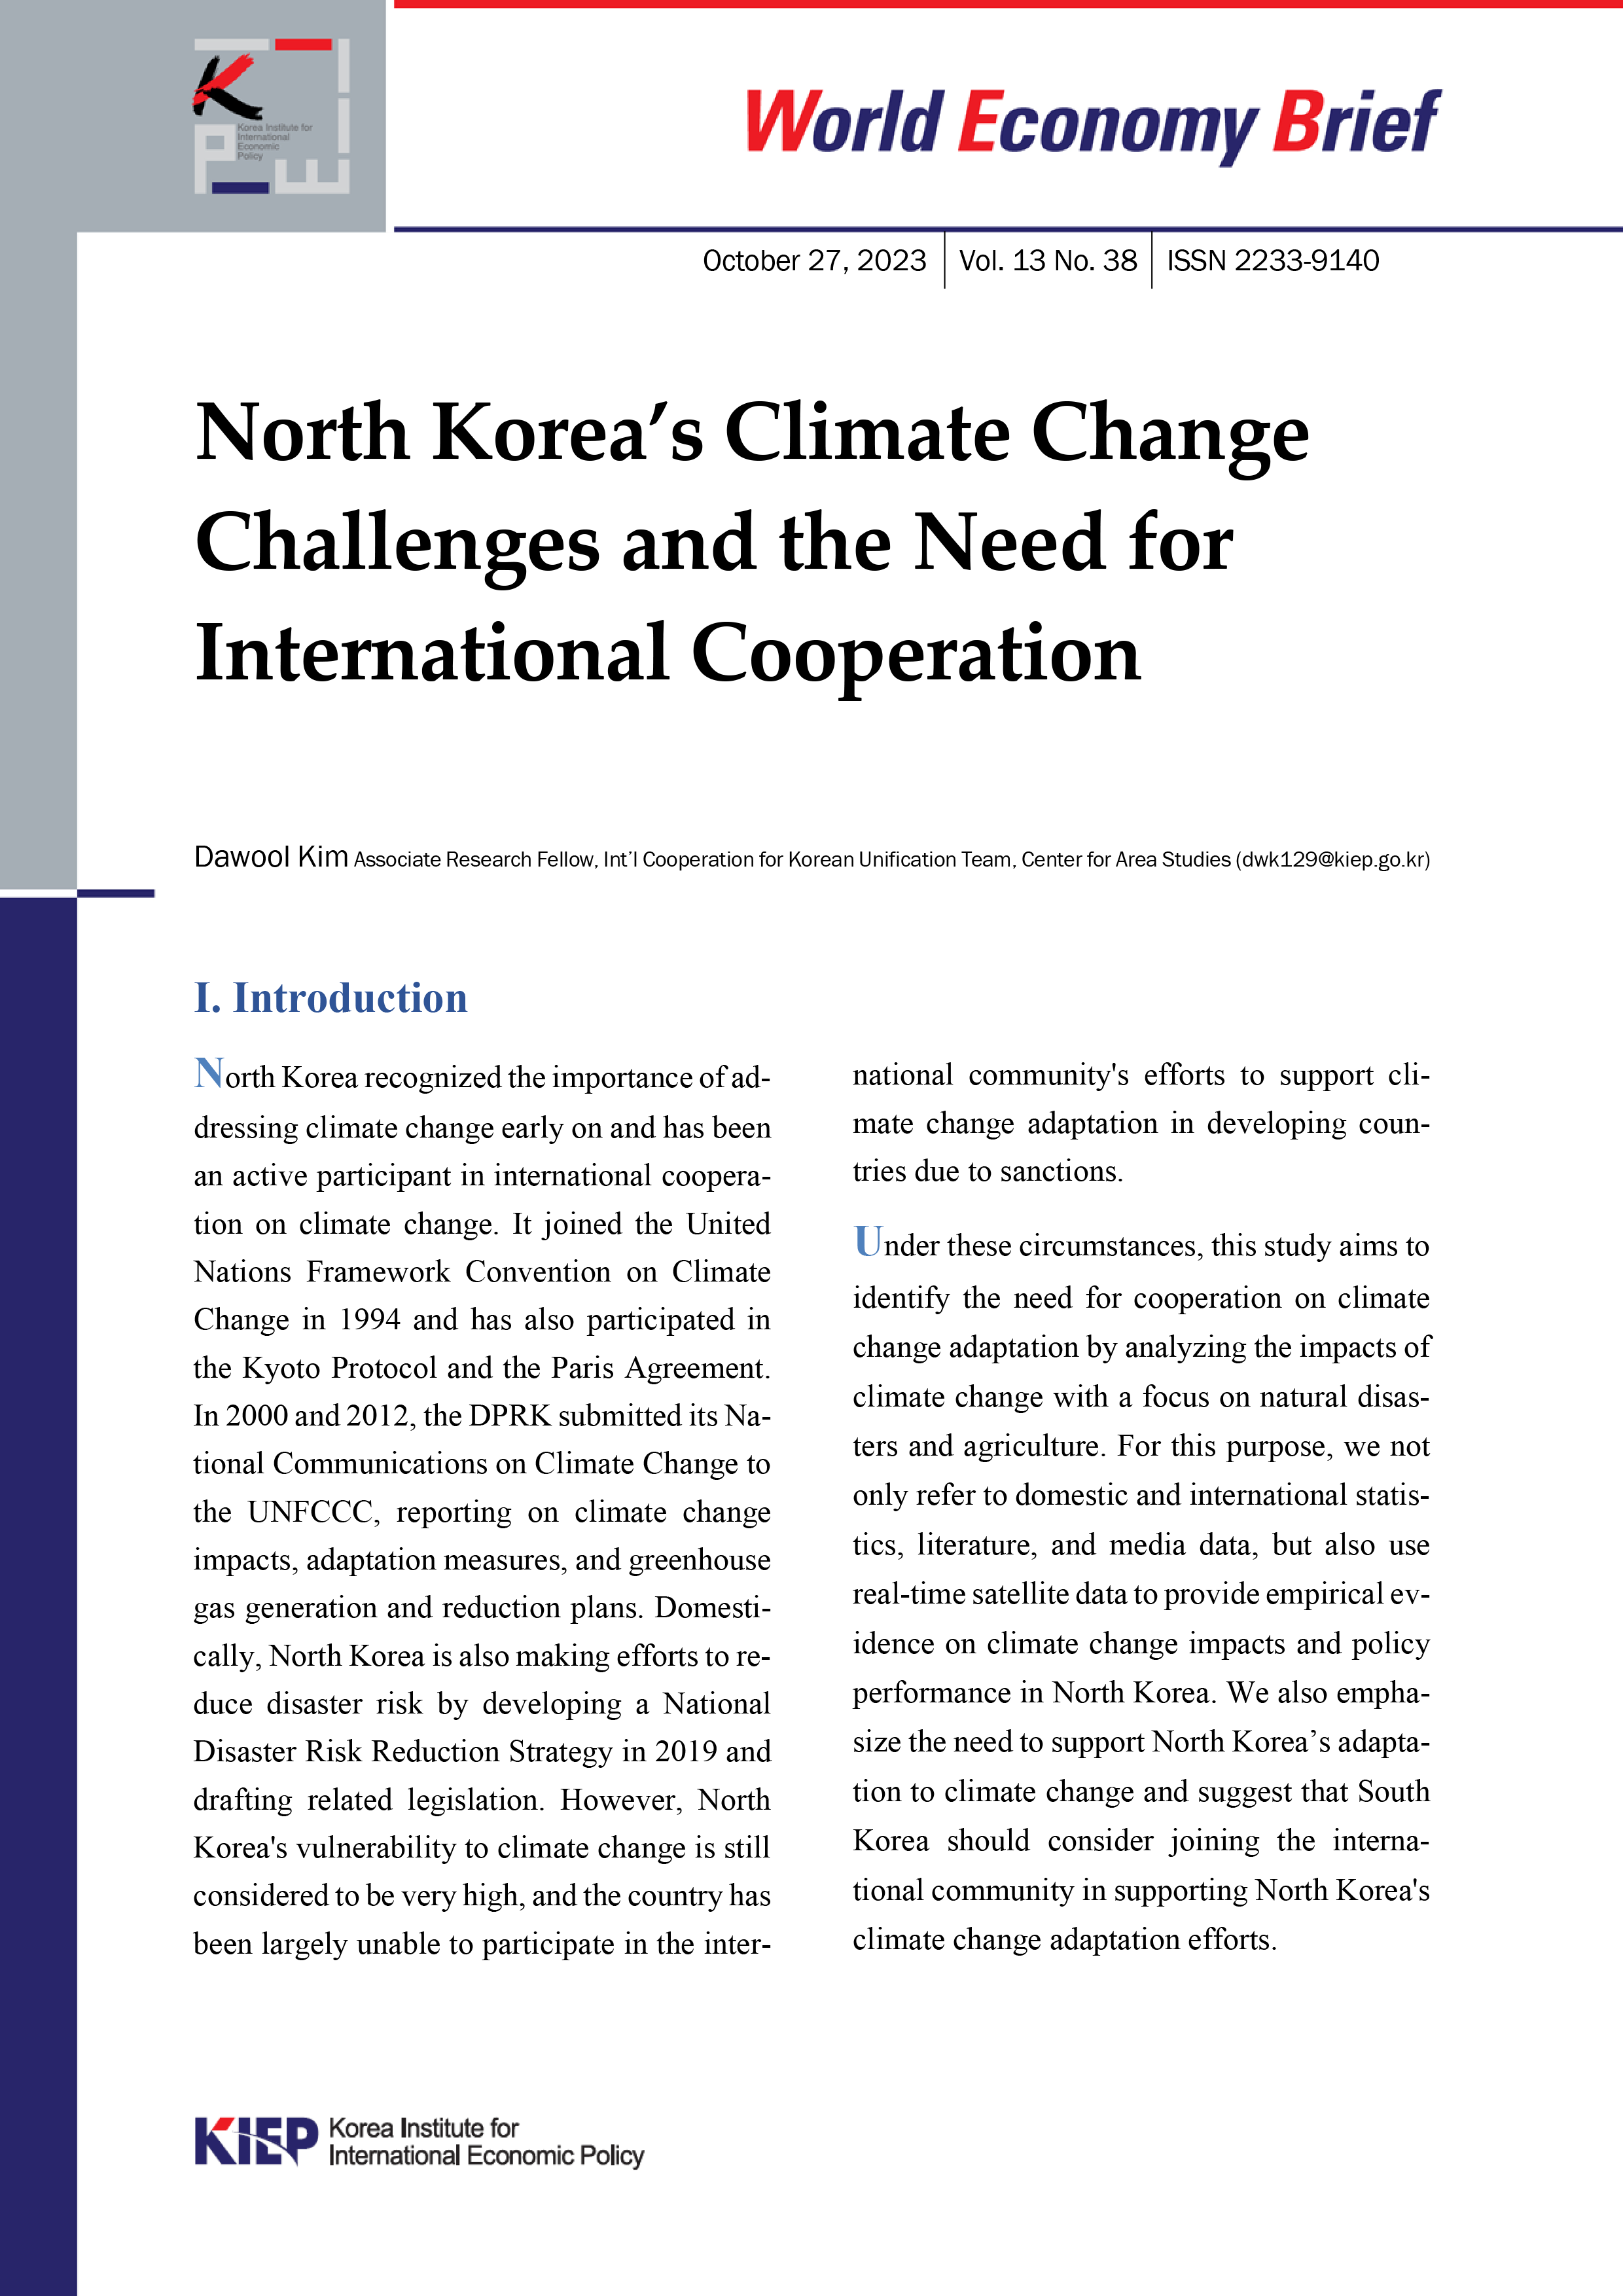 North Korea’s Climate Change Challenges and the Need for International Cooperation